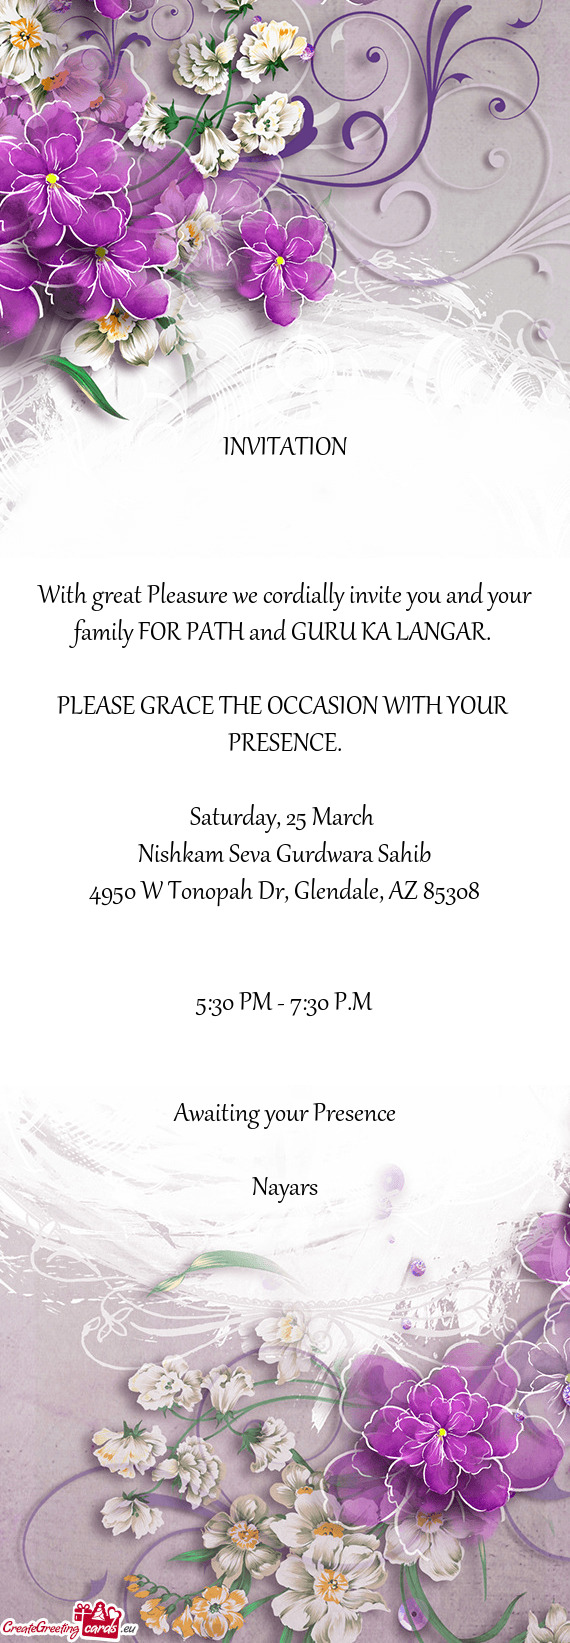 With great Pleasure we cordially invite you and your family FOR PATH and GURU KA LANGAR